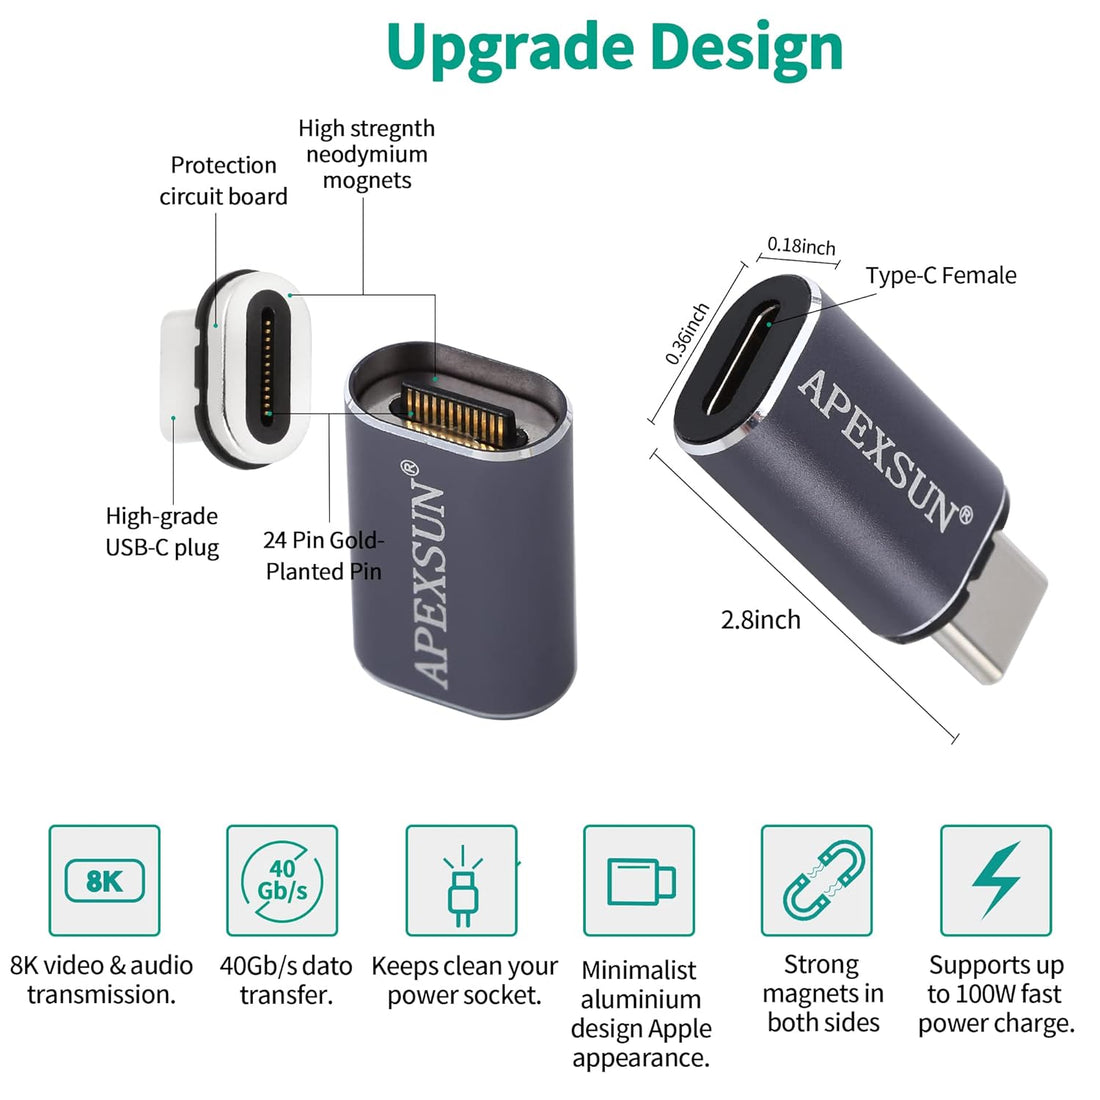 APEXSUN USB C Magnetic Adapter and USB C Connector, USB C Connector Right Angle Support USB PD 100W Quick Charge, Faster Data Transfer Compatible with USB C Devices（Straight, Silver Gray，24-Pin）